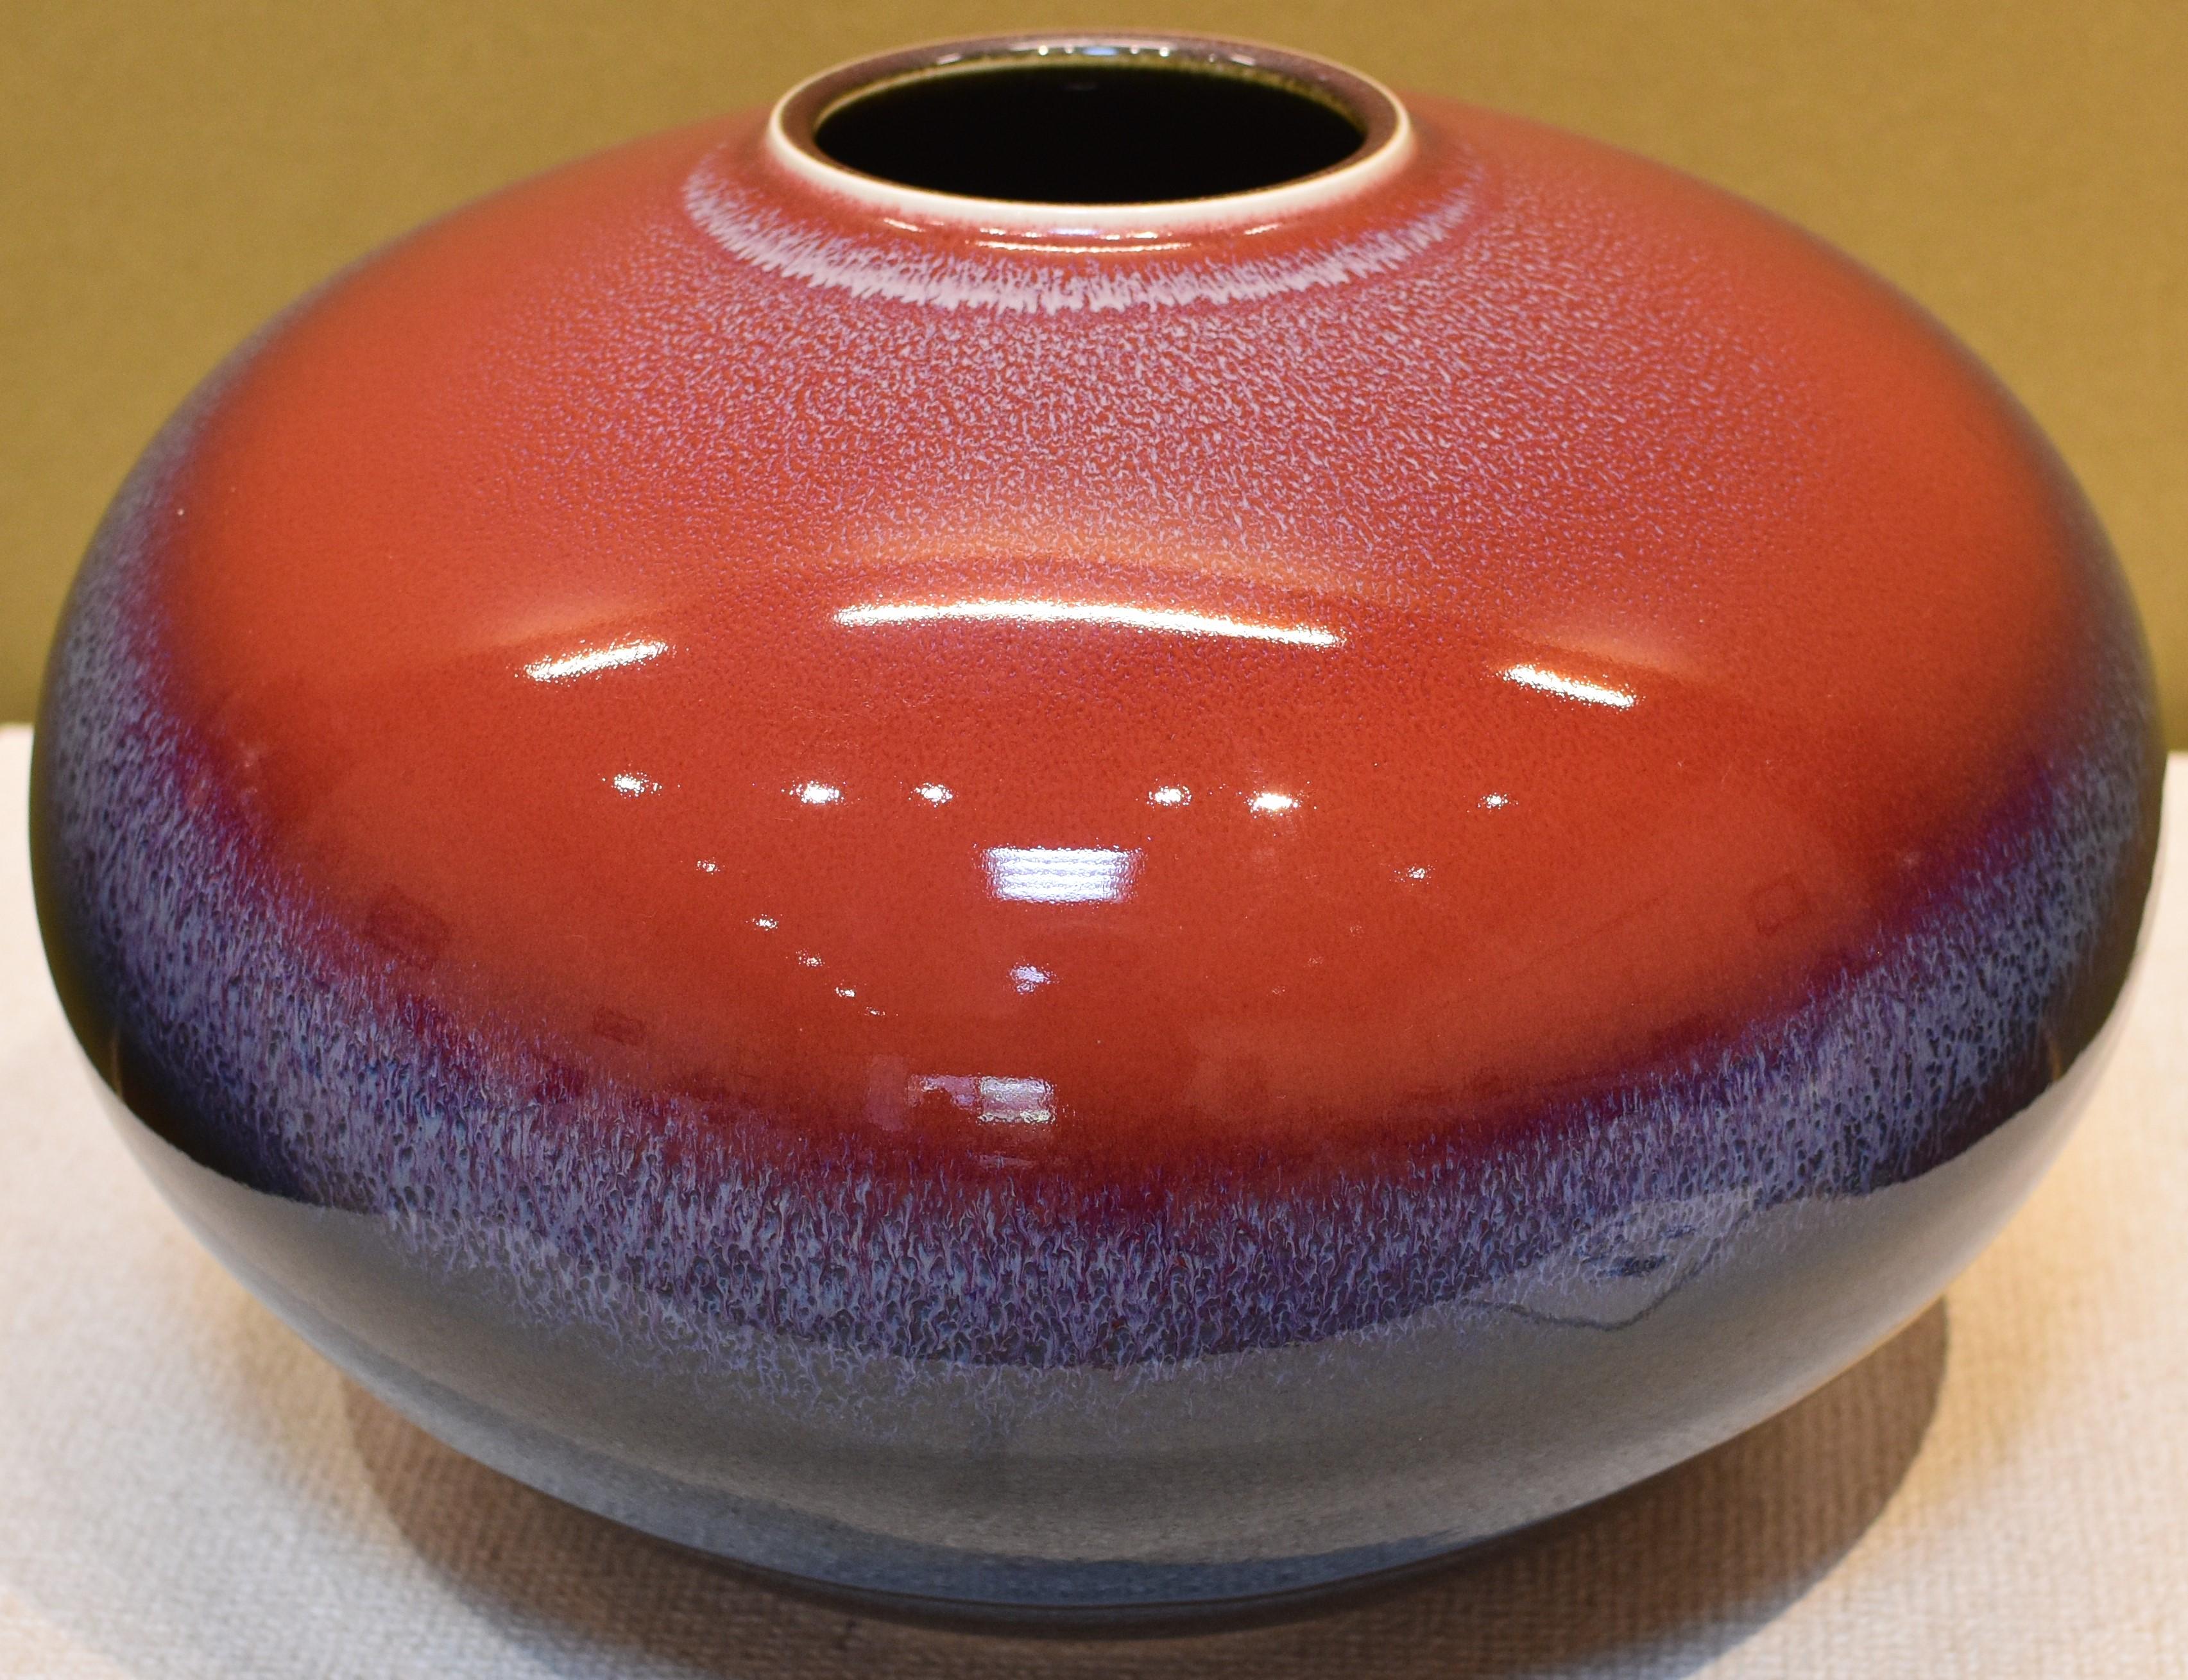 extraordinary museum quality hand-glazed Japanese contemporary decorative porcelain vase, an exhibition piece in a striking shape in deep red, blue and black, by master porcelain artist of the Arita-Imari region of Japan. The artist’s basic